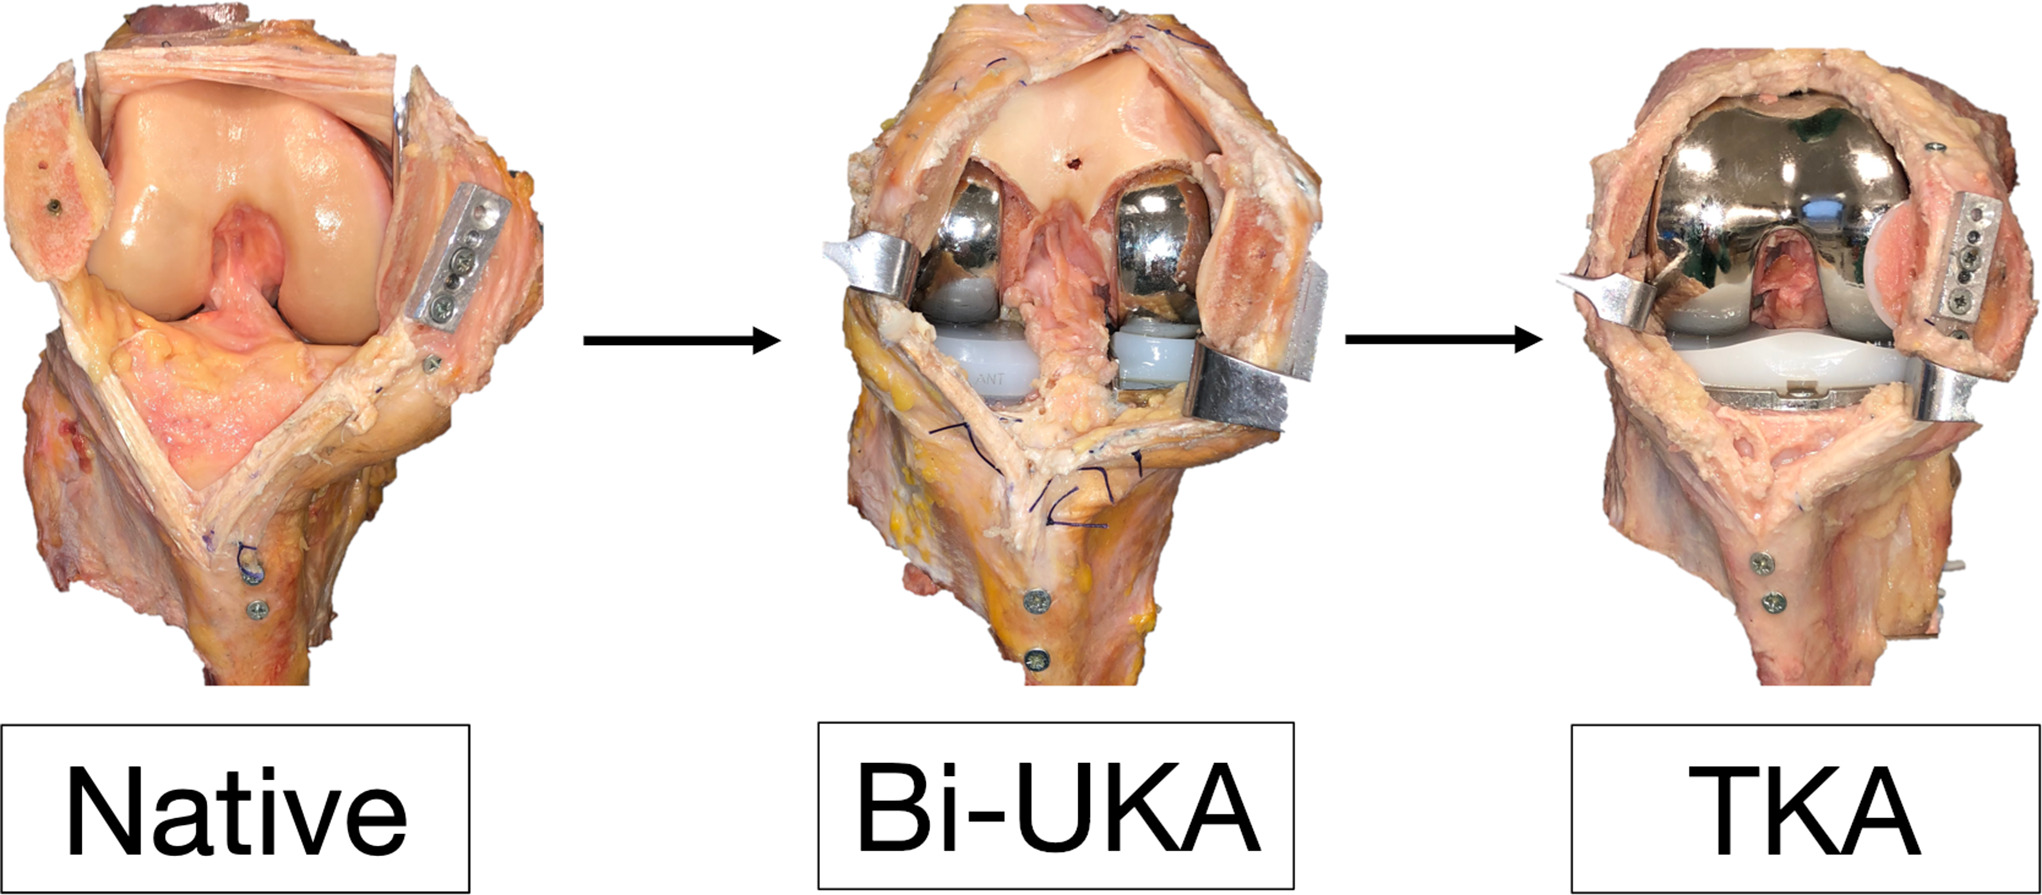 Fig. 4 
            Operative states for cadaveric testing. In the native and bi-unicondylar arthroplasty (Bi-UKA) states, the anterior cruciate ligament is intact and the patellofemoral joint is preserved; a transpatellar approach with longitudinal tendon split of rectus femoris, vastus intermedius, and the patellar tendon has been used to prevent disruption to the medial and lateral parapatellar tendons. TKA, total knee arthroplasty.
          